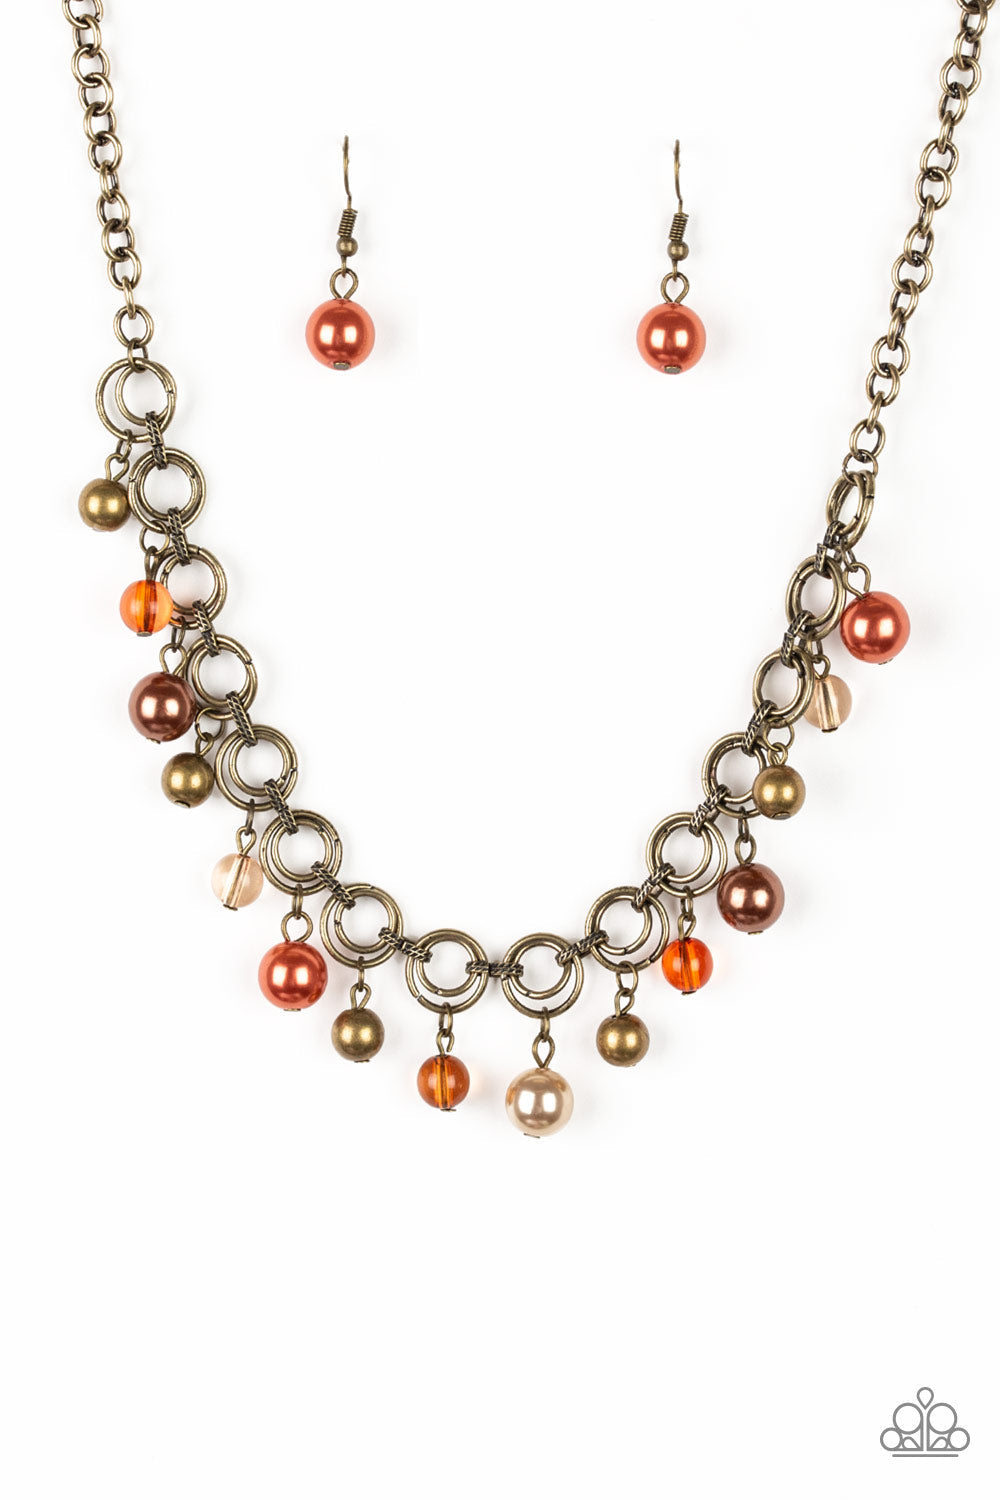 Fiercely Fancy - Brass and Orange Fashion Necklace - Paparazzi Accessories - Pearly and glassy brass, brown, and orange beads swing from a double-linked brass chain, for a fancy fringe below the collar fashion necklace.